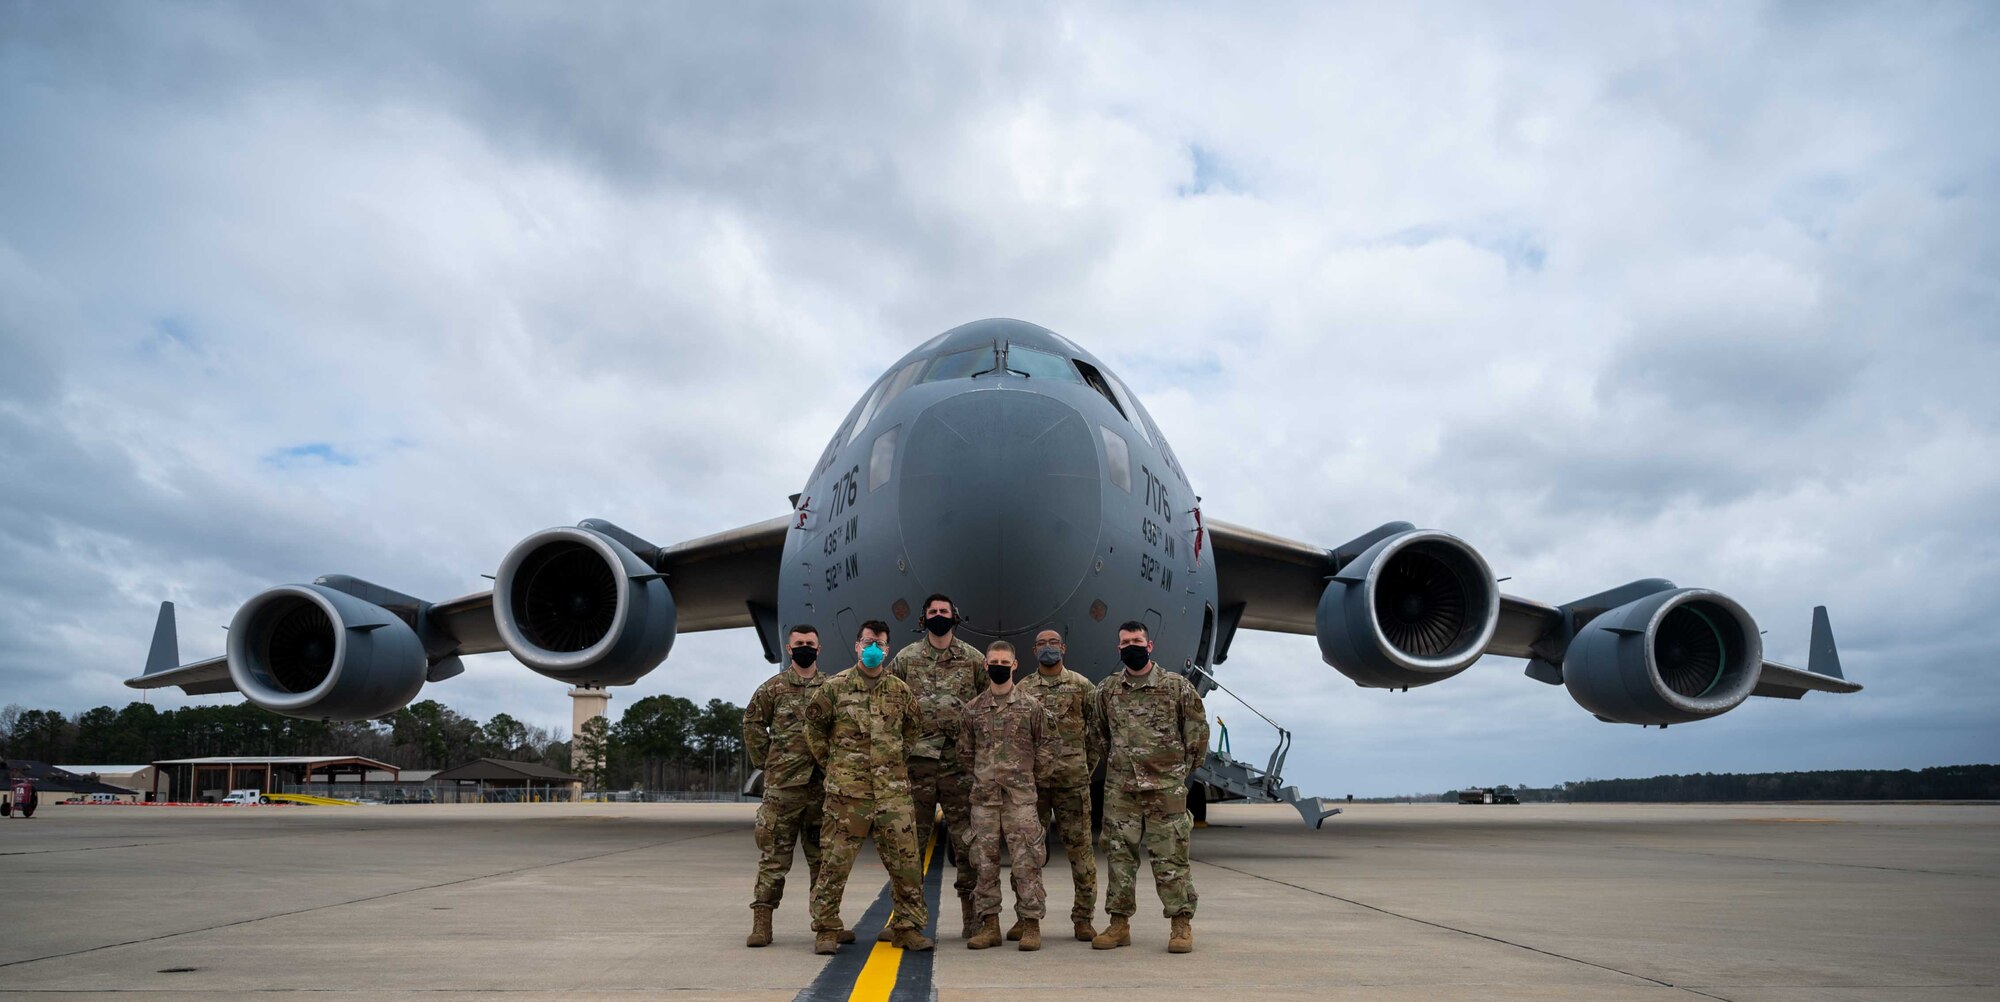 Team Dover’s Multi-Capable Airmen team poses for a photo in front of a Dover AFB C-17 Globemaster III during exercise Razor Talon at Seymour Johnson AFB, North Carolina, March 22, 2021. The base’s MCA program developed and equipped seven Airmen to perform tasks outside of their Air Force Specialty Codes. Exercises such as RT help integrate MCA into joint and combined expeditionary operations around the globe.  (U.S. Air Force photo by Airman 1st Class Faith Schaefer)